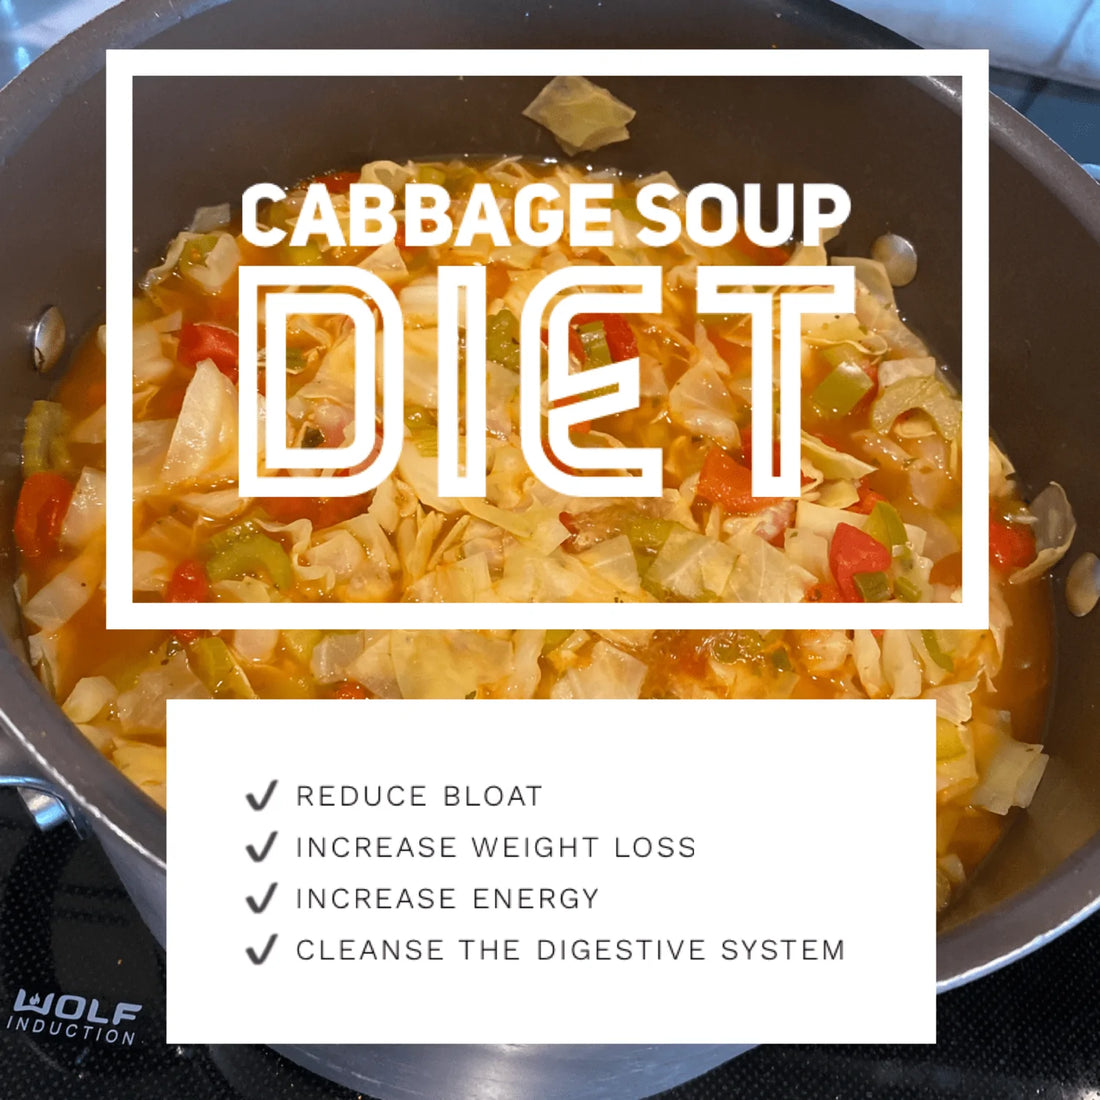 Swimsuit Season- Do The Cabbage Soup Diet!